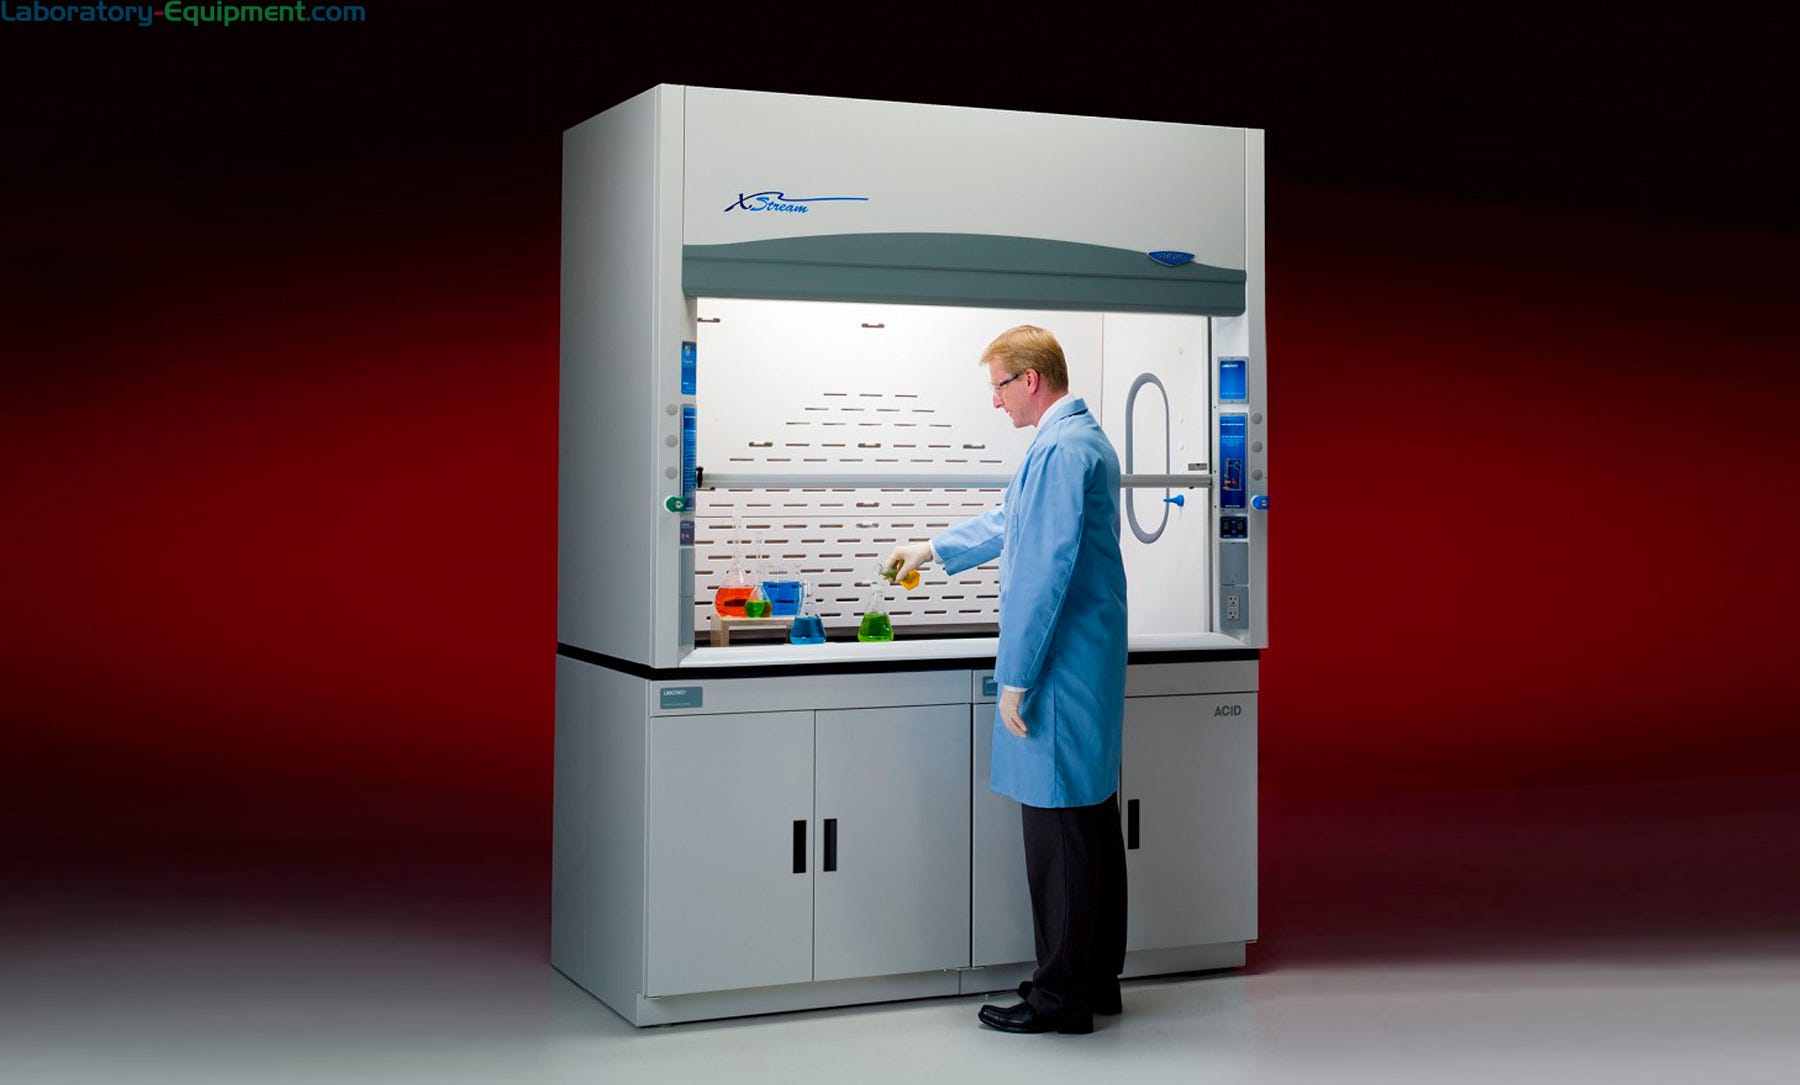 Protector Classmate Laboratory Fume Hoods By Labconco